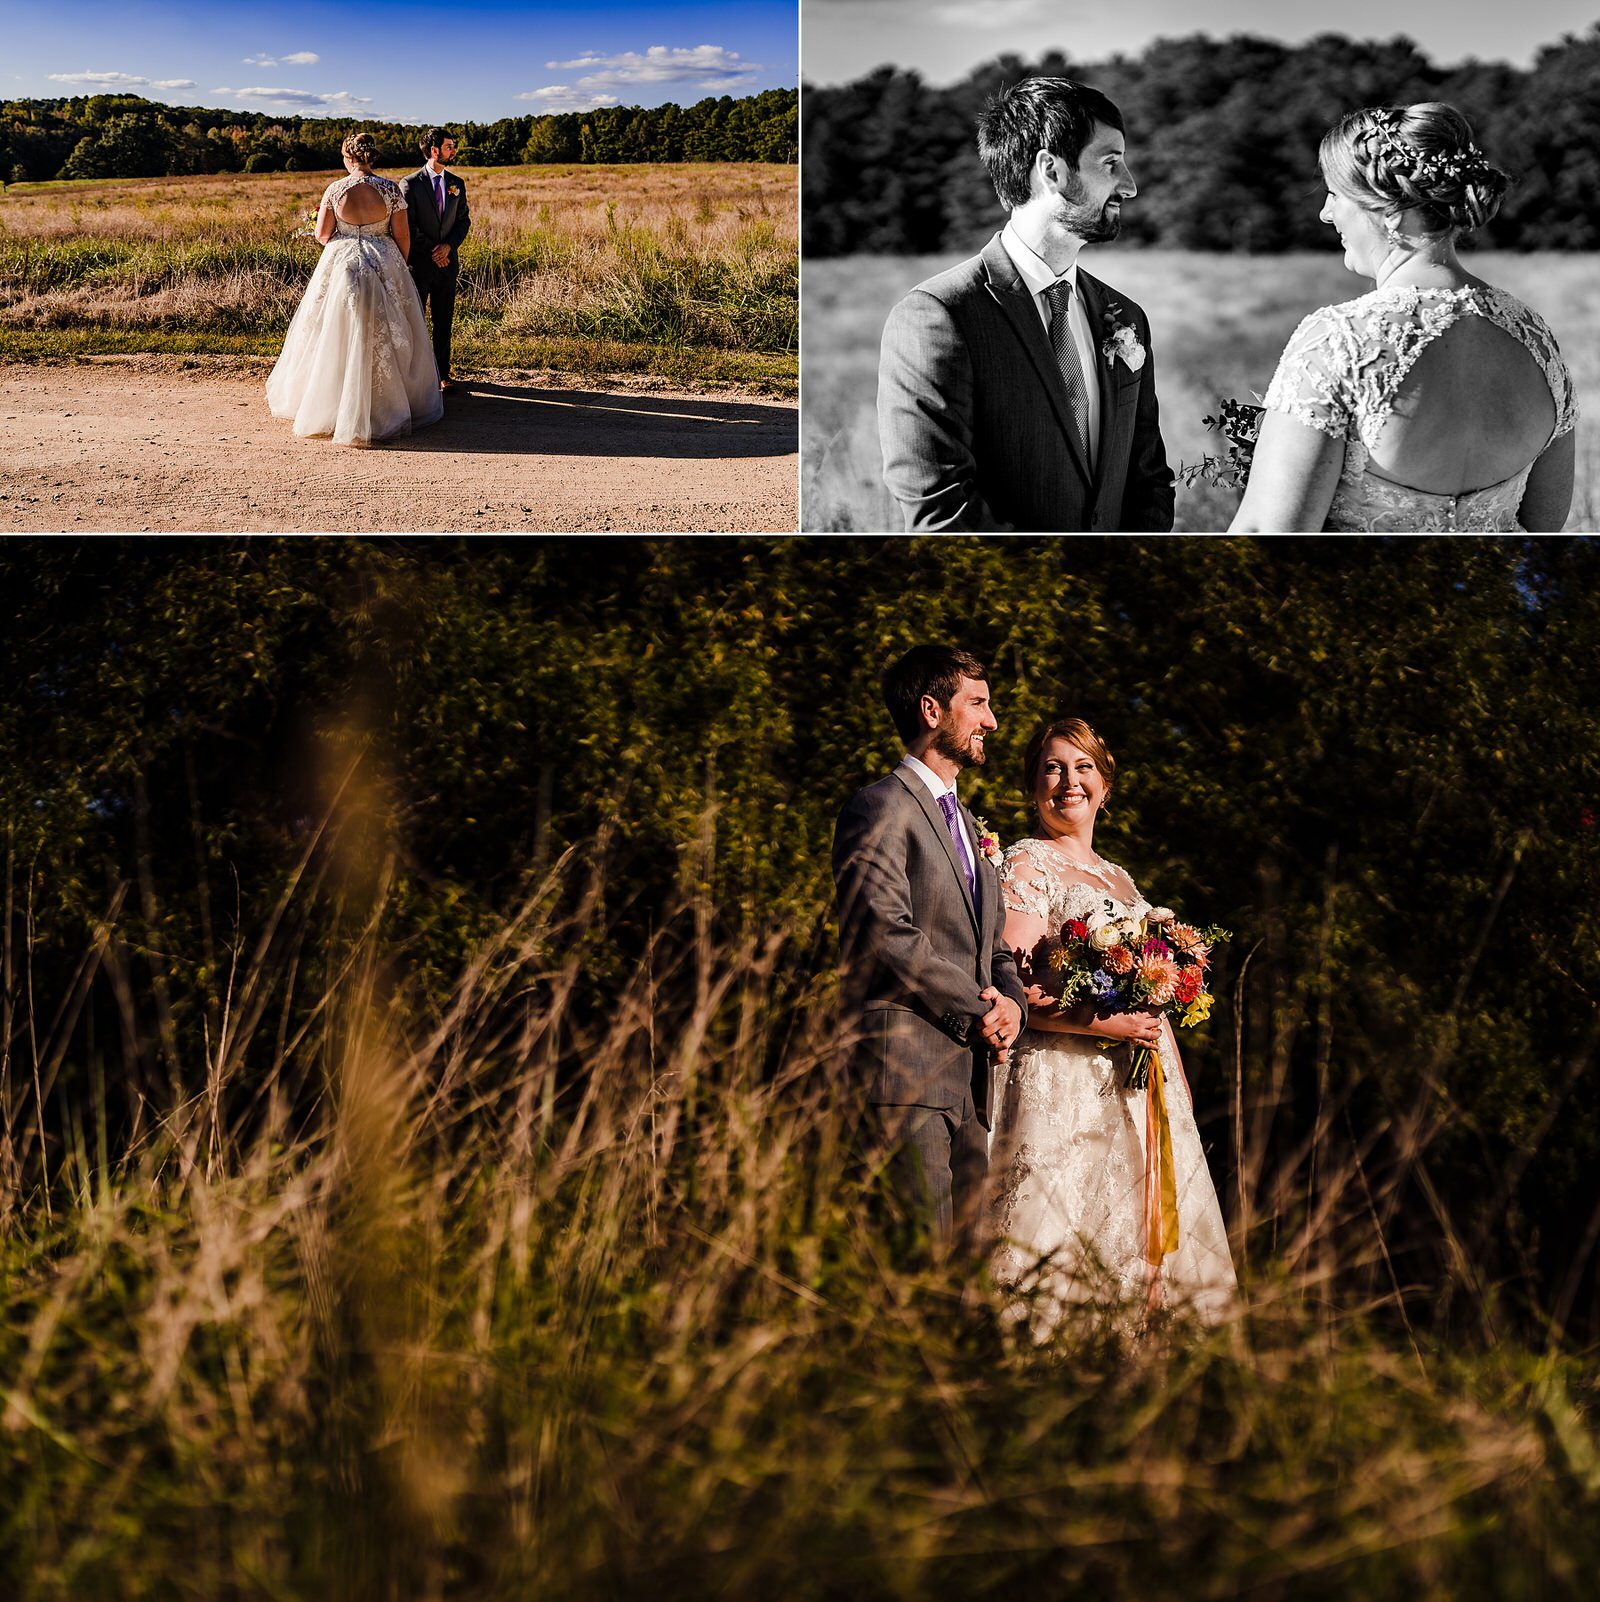 Portraits of a bride and groom on a gorgeous wedding day at The Meadows Raleigh